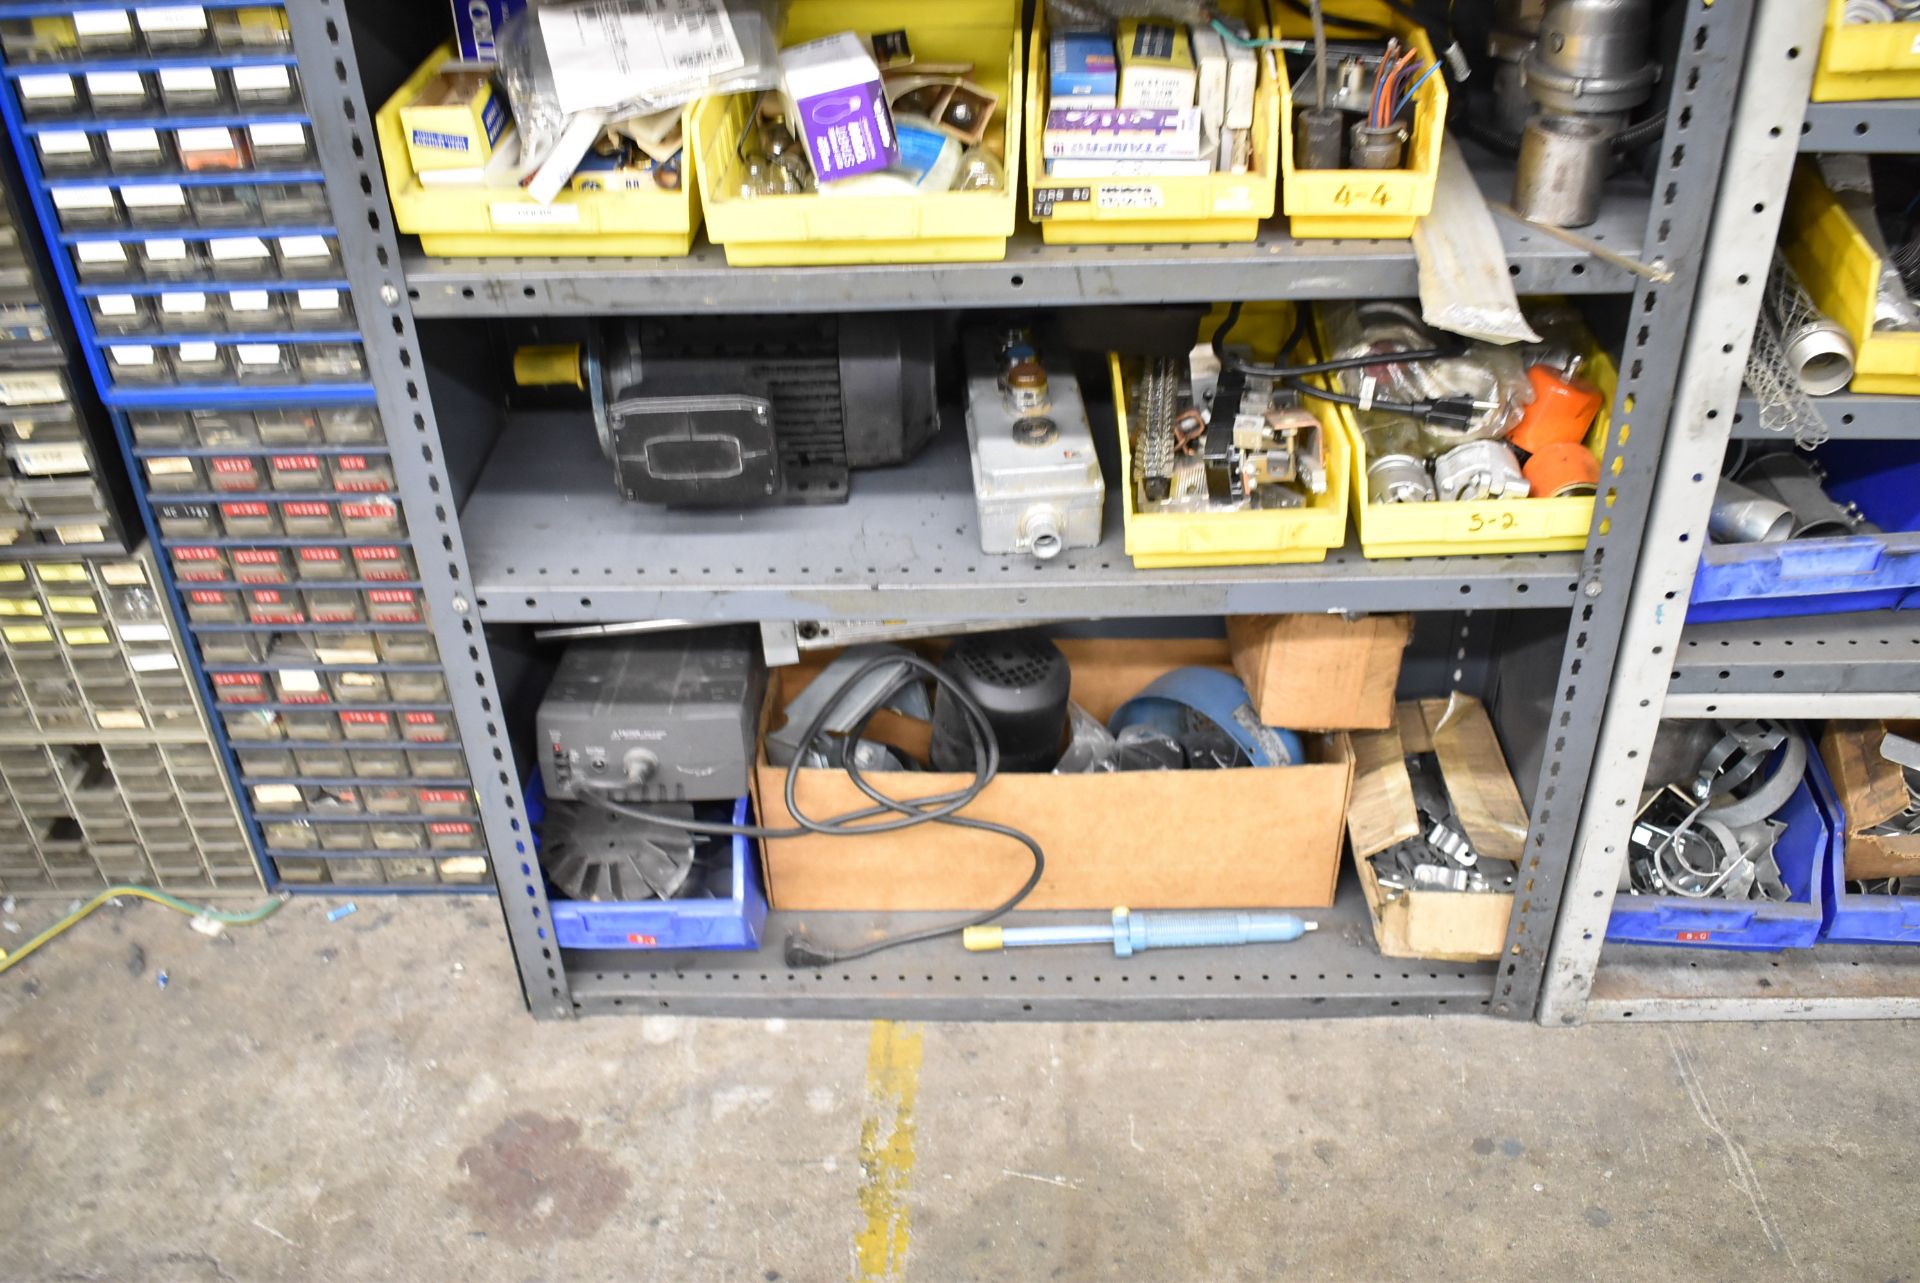 LOT/ STEEL SHELF WITH CONTENTS - INCLUDING ELECTRIC MOTOR, PLUGS, SIGNAL LIGHTS, RELAYS, - Image 6 of 6